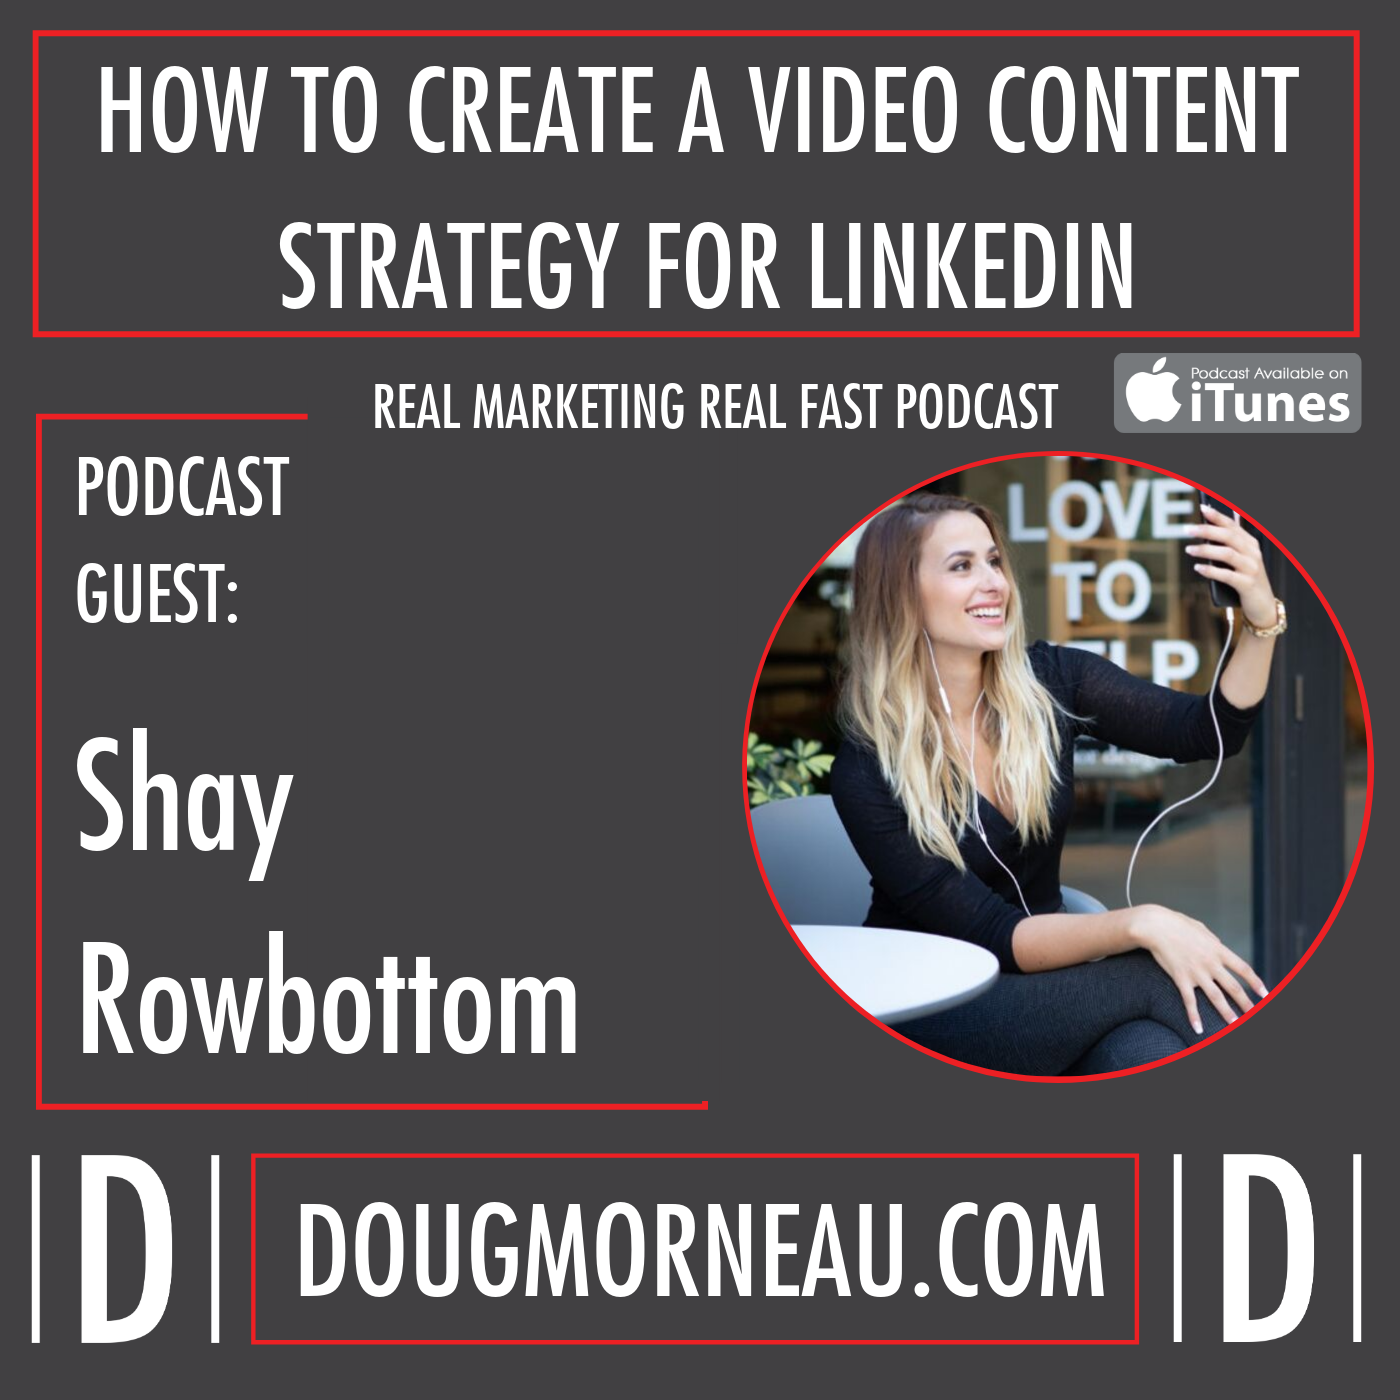 HOW TO CREATE A VIDEO CONTENT STRATEGY FOR LINKEDIN WITH SHAY ROWBOTTOM - DOUG MORNEAU - REAL MARKETING REAL FAST PODCAST